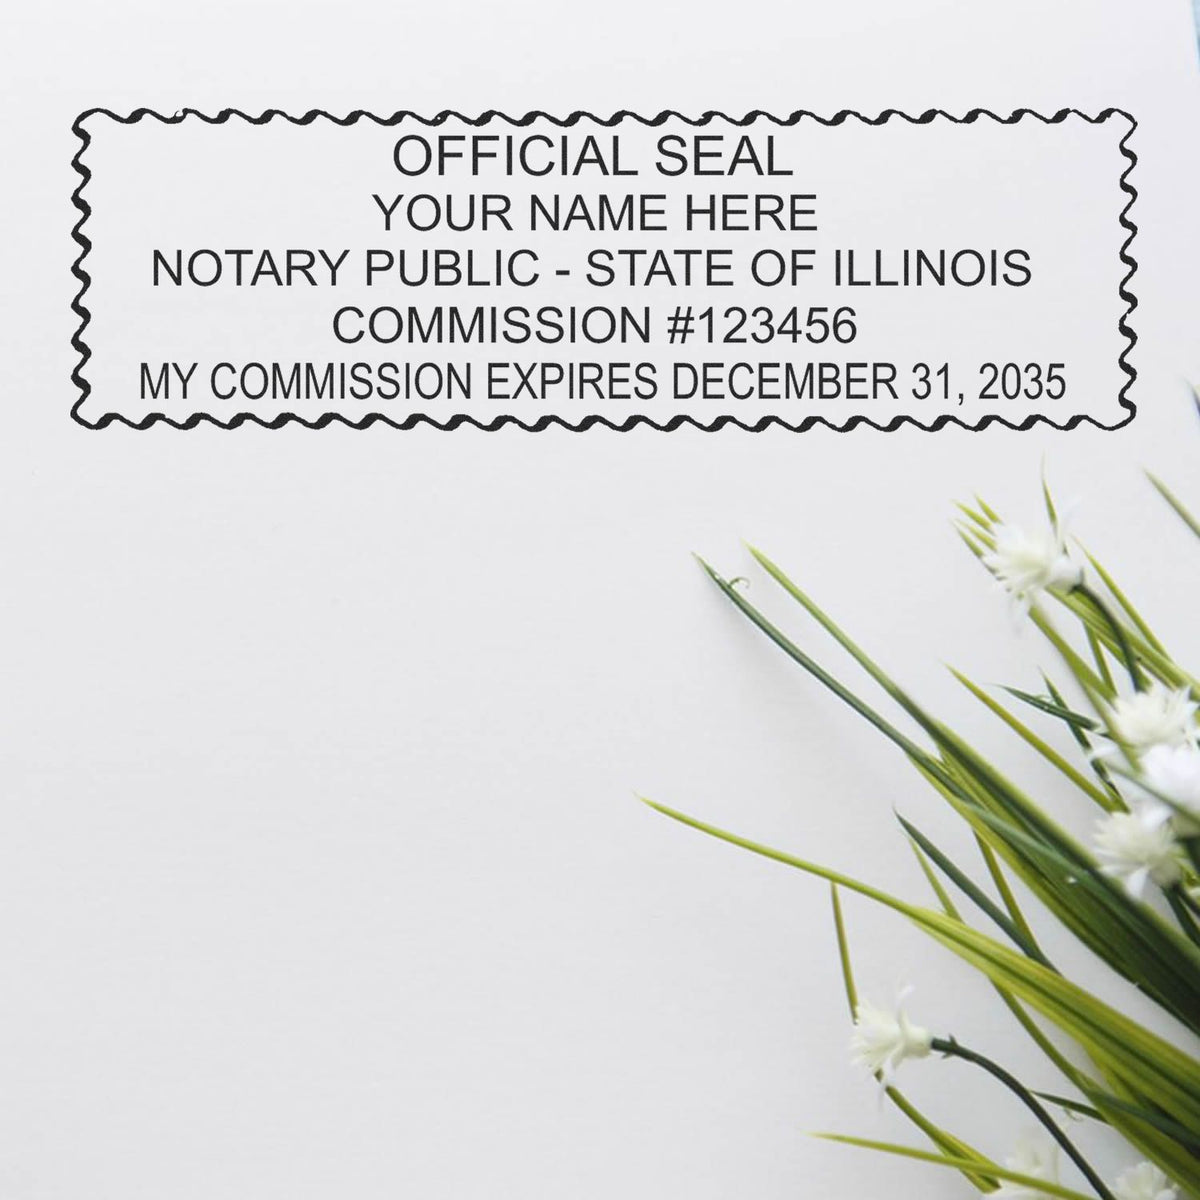 An alternative view of the Slim Pre-Inked Rectangular Notary Stamp for Illinois stamped on a sheet of paper showing the image in use